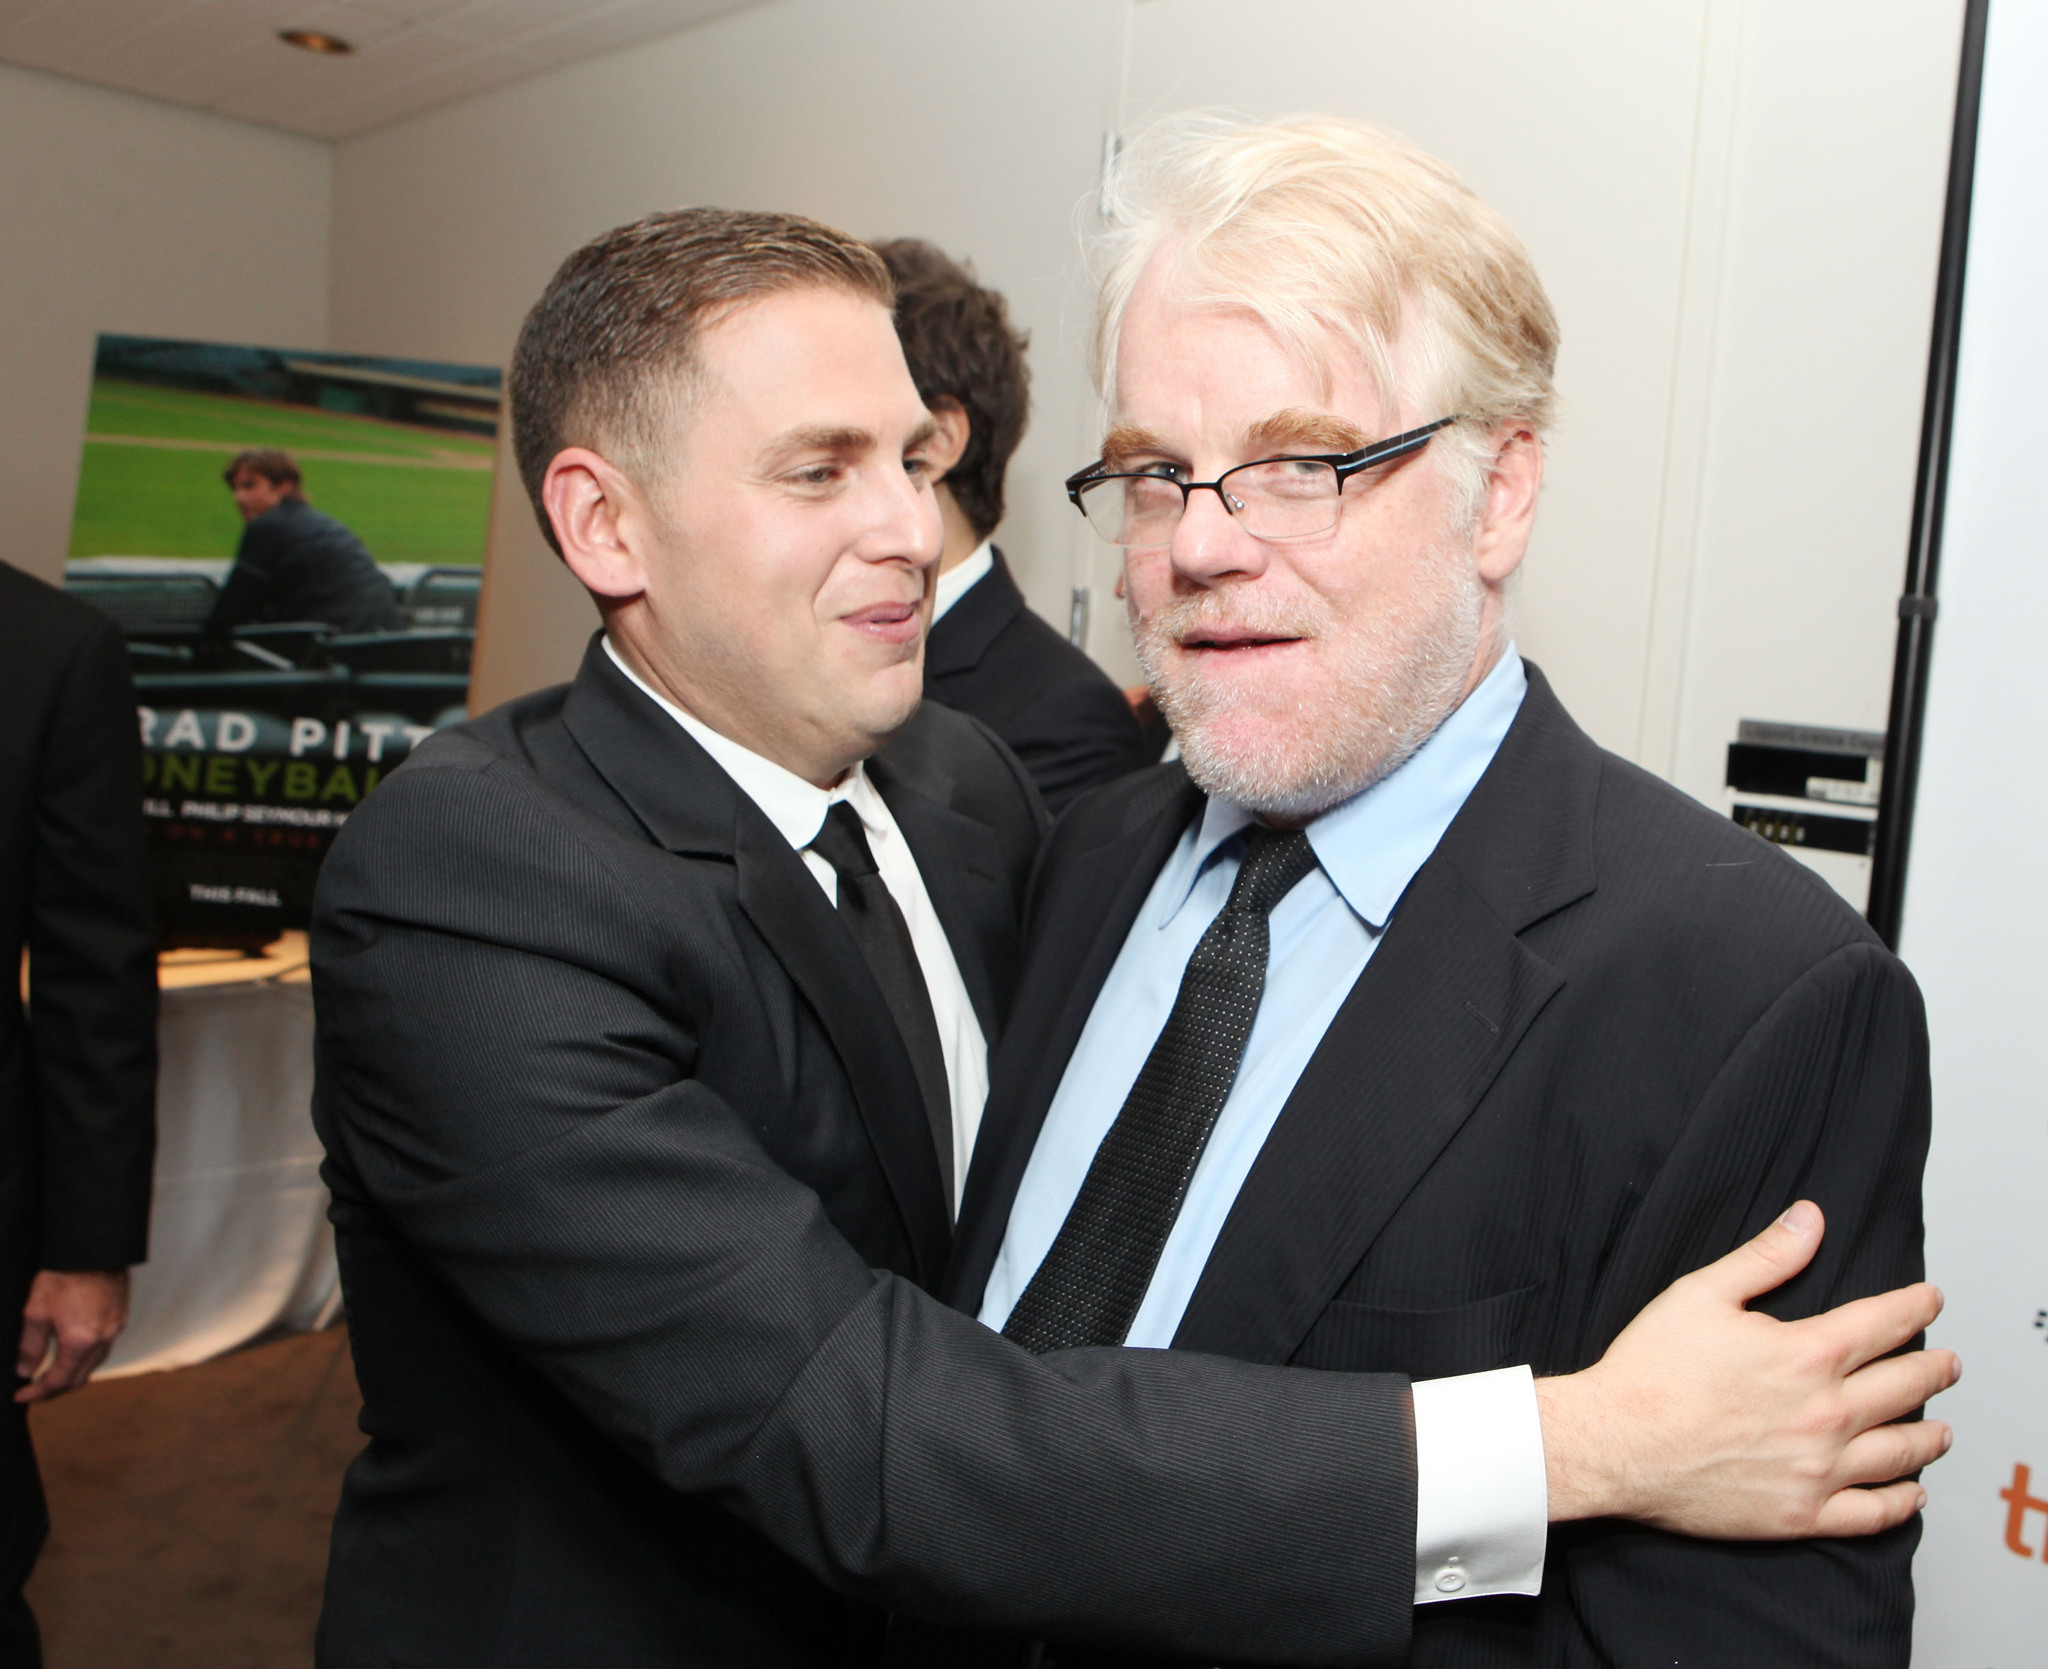 Philip Seymour Hoffman and Jonah Hill at event of Zmogus, pakeites viska (2011)